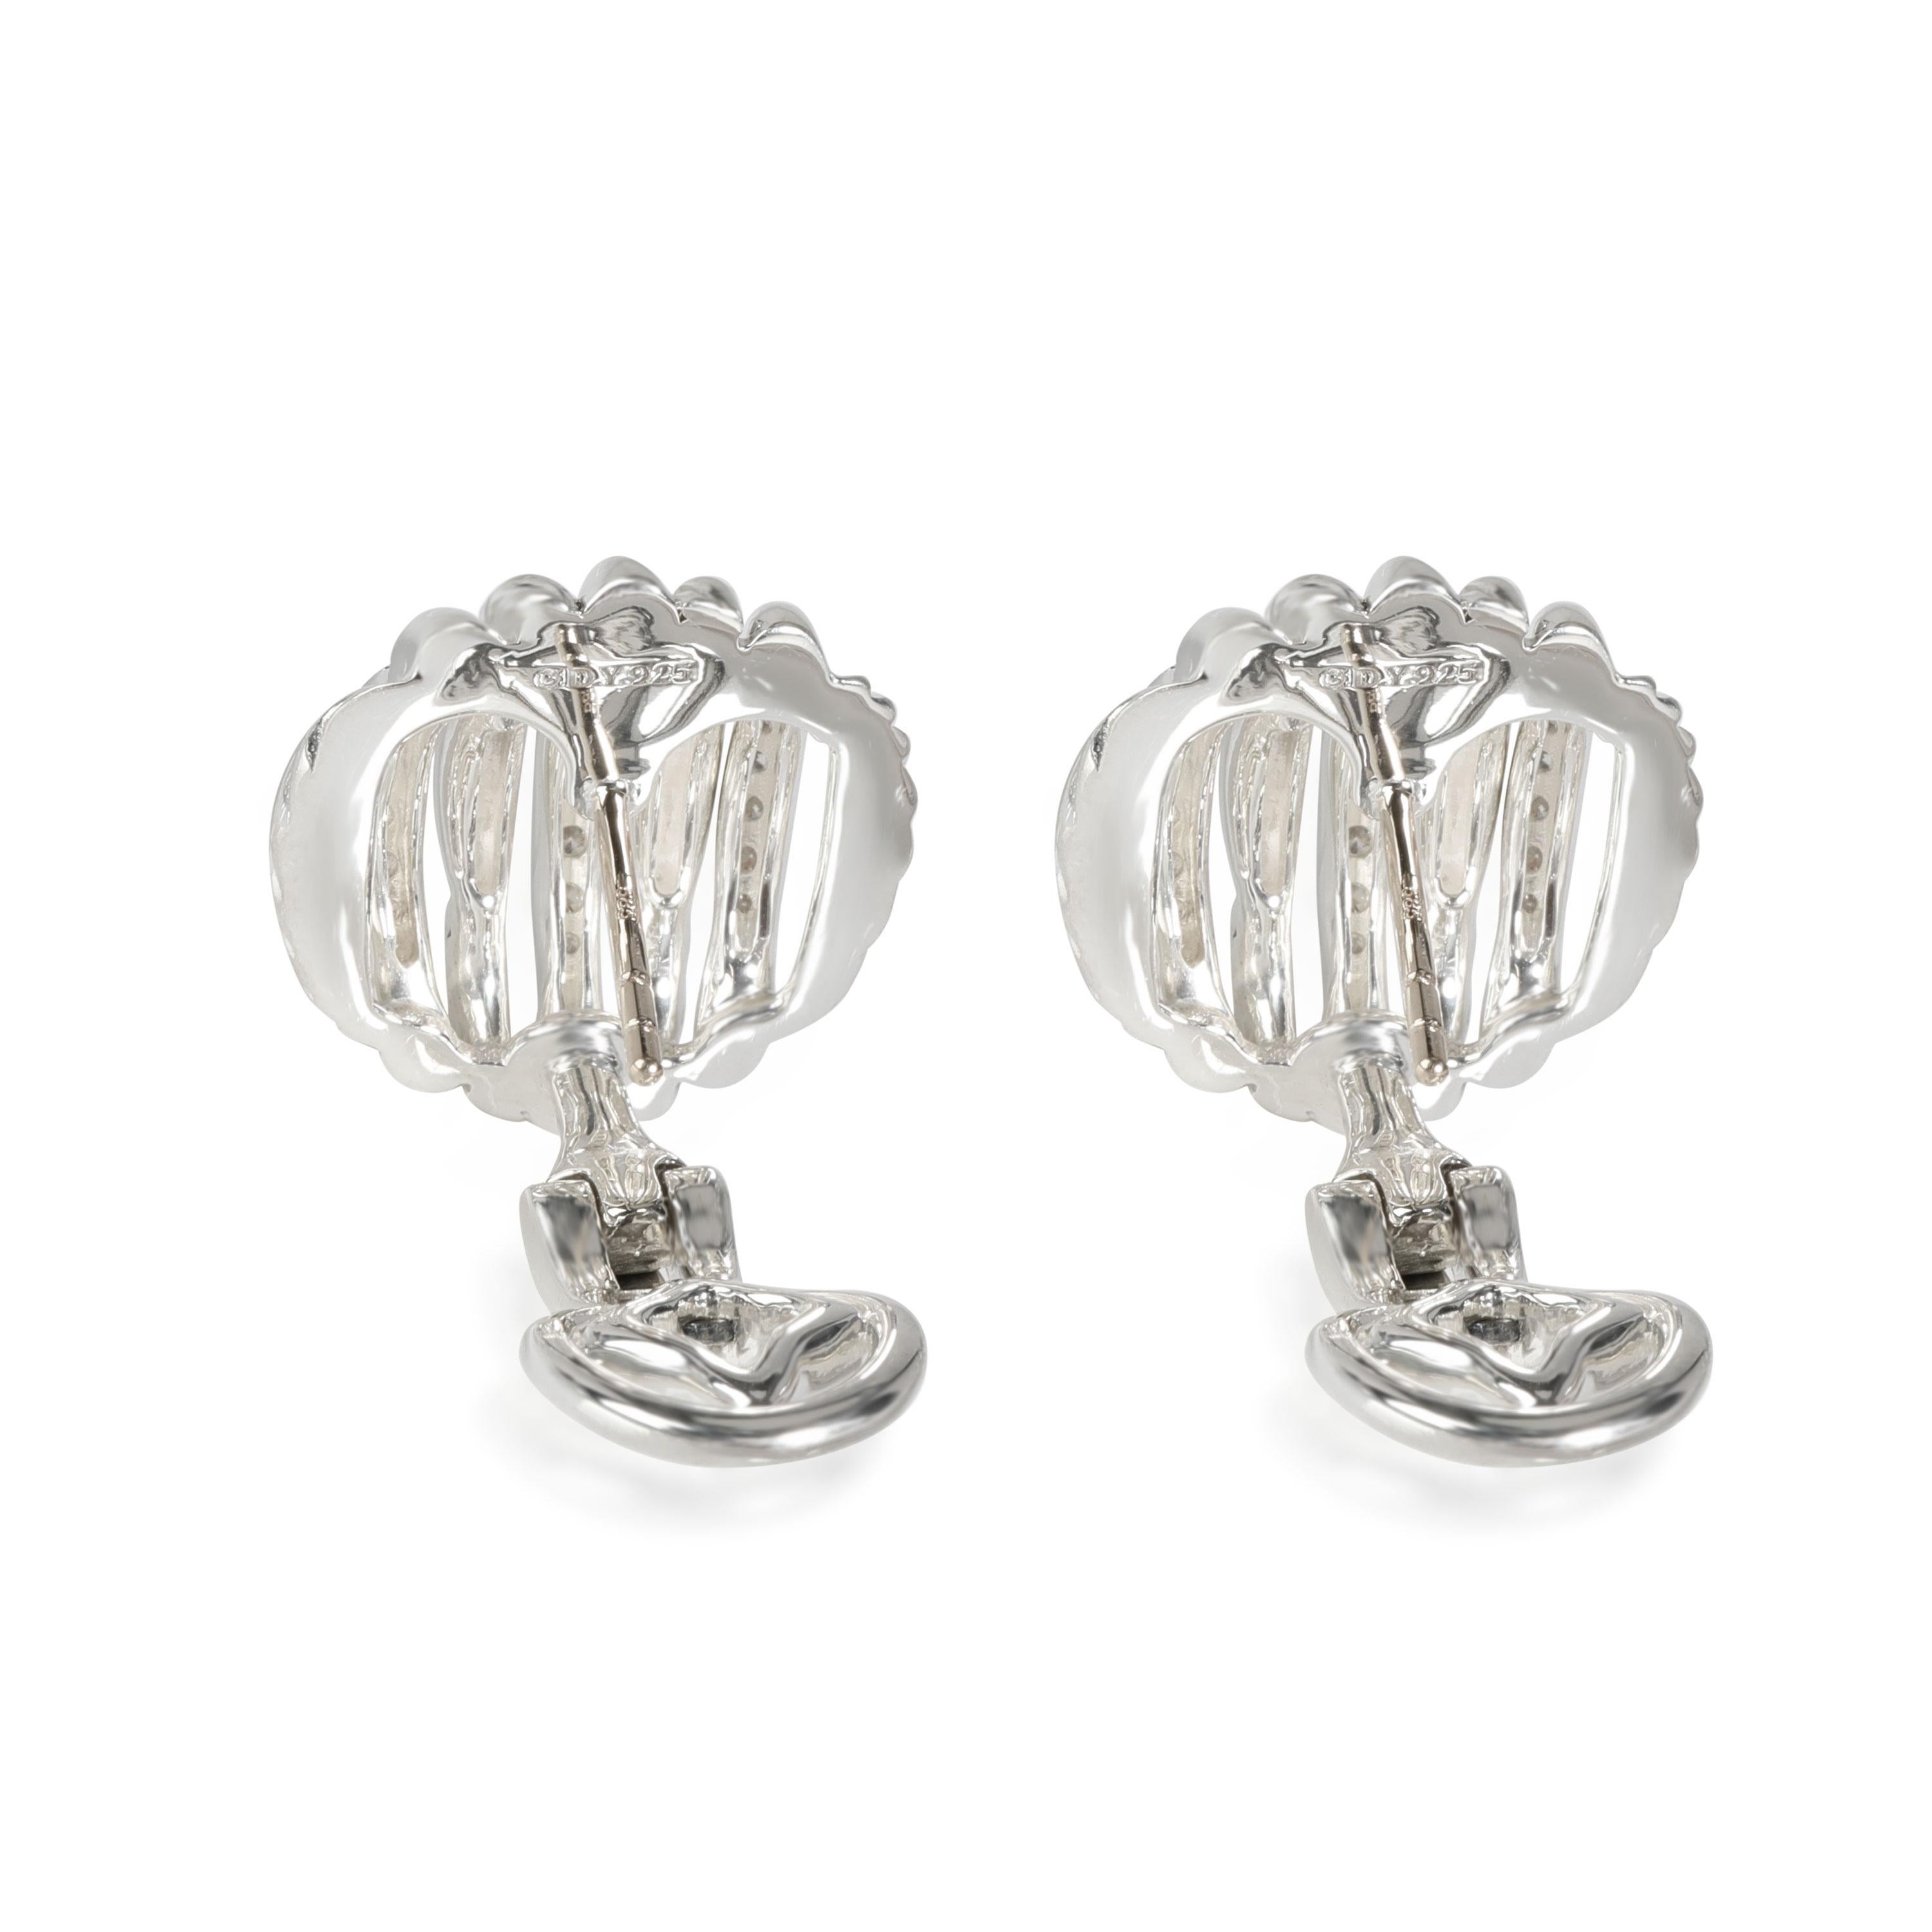 David Yurman Tides Diamond Earrings in  Sterling Silver 0.54 CTW

PRIMARY DETAILS
SKU: 115342
Listing Title: David Yurman Tides Diamond Earrings in  Sterling Silver 0.54 CTW
Condition Description: Retails for 1950 USD. In excellent condition and